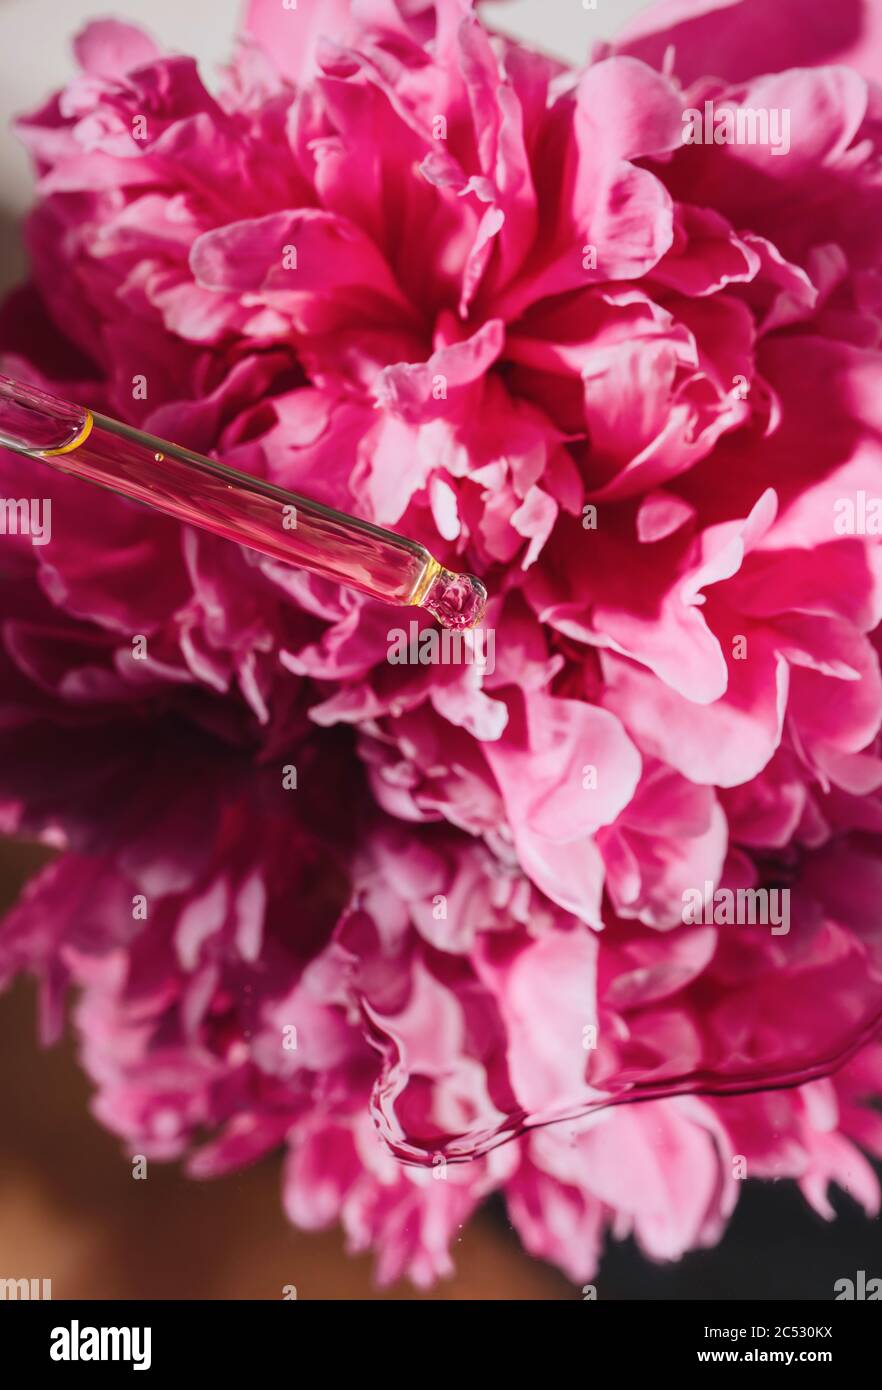 Pipette with cosmetic oil next to a peony on a mirror Stock Photo